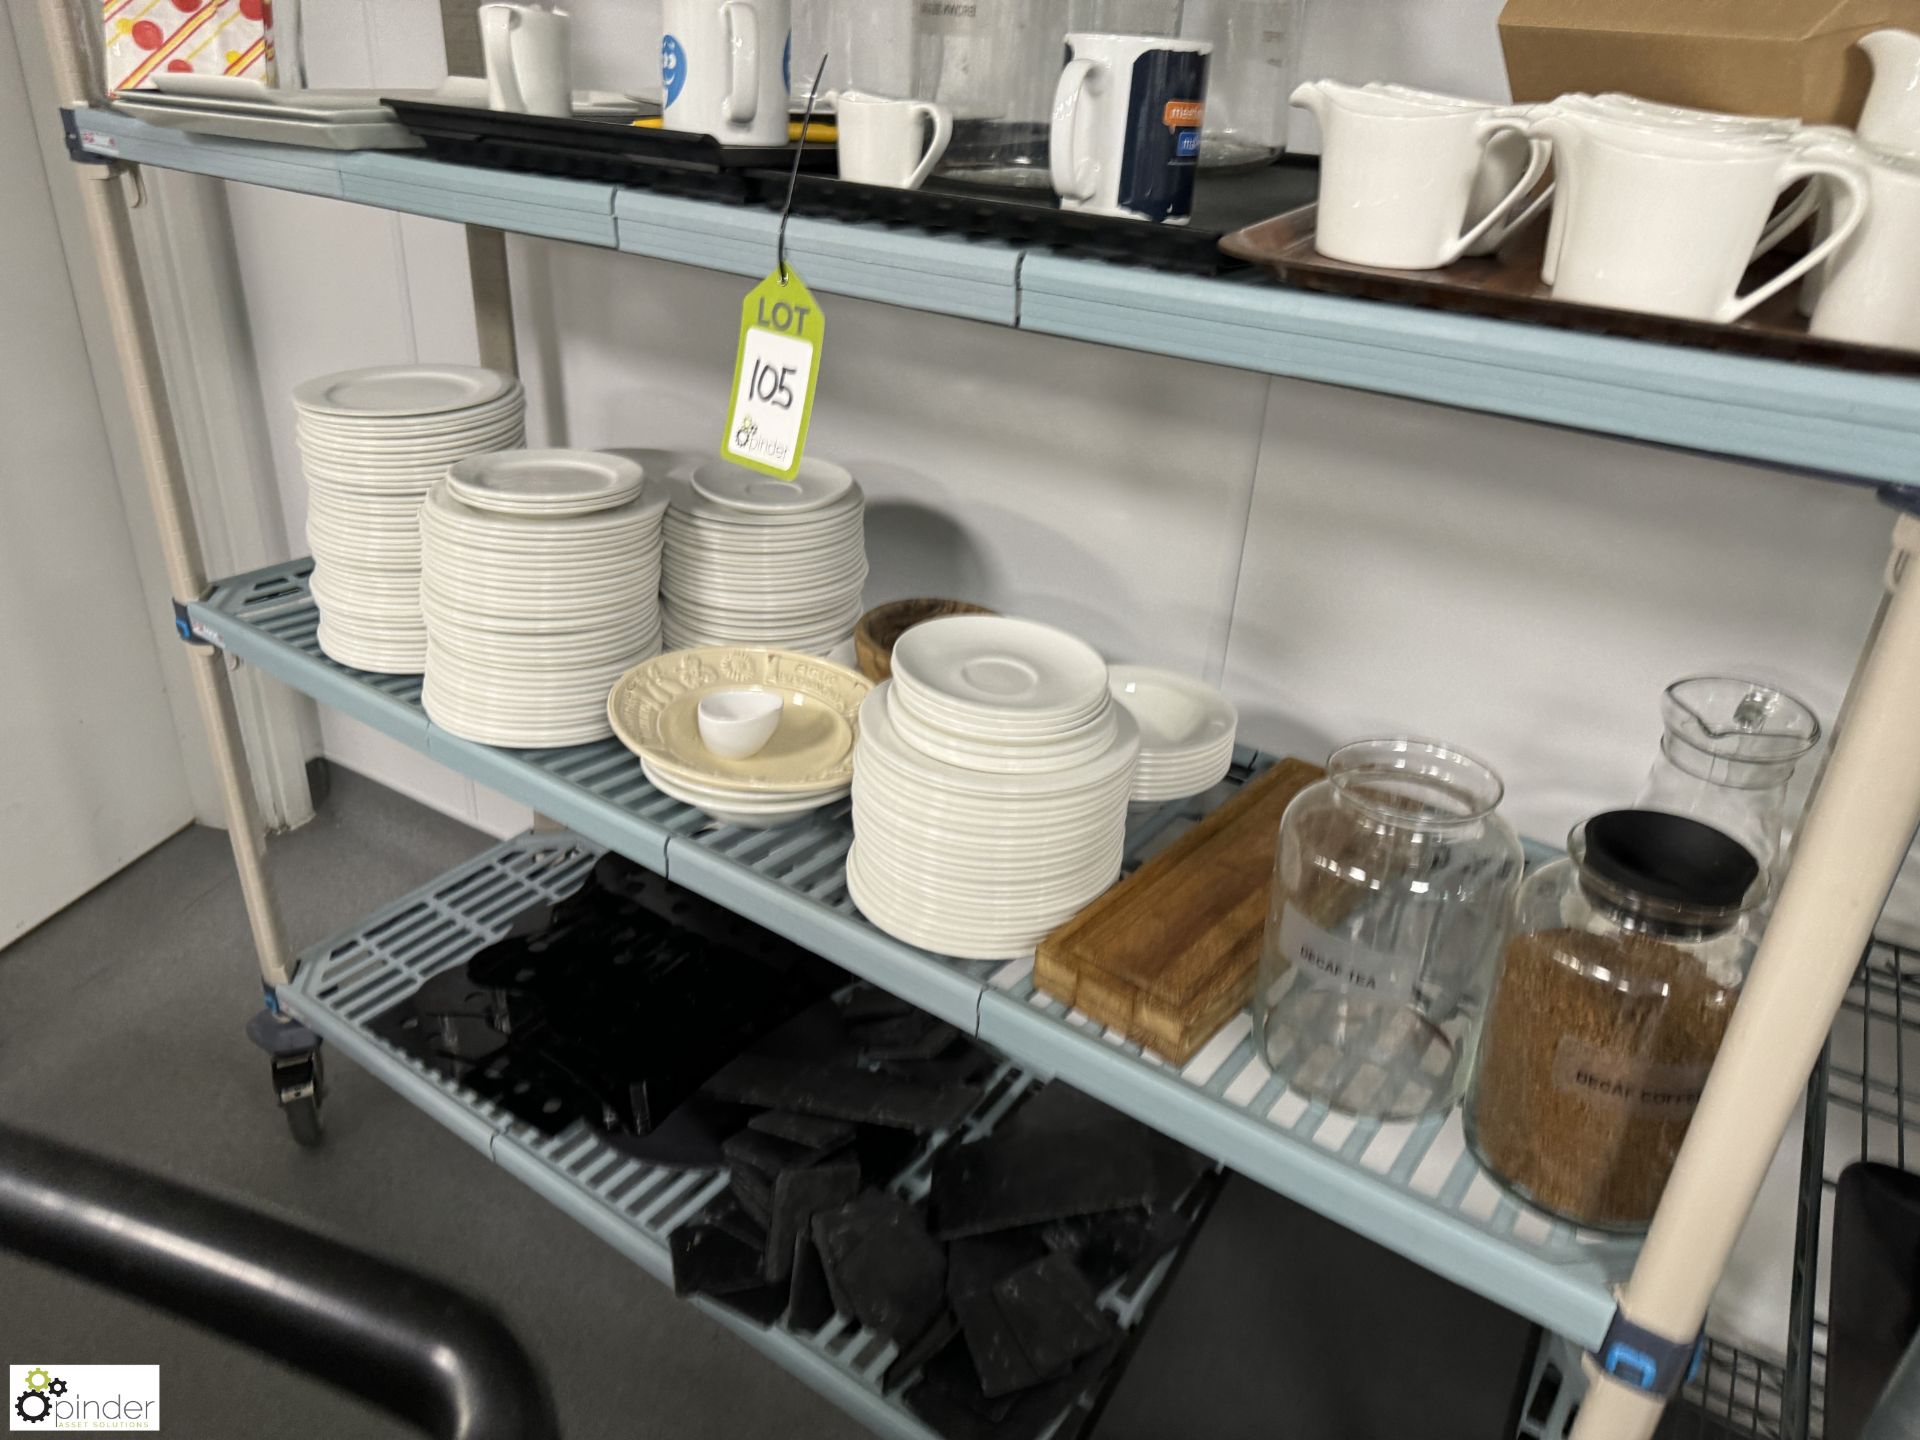 2 various Racks and Contents, including crockery, jars, etc (location in building – basement kitchen - Image 6 of 7